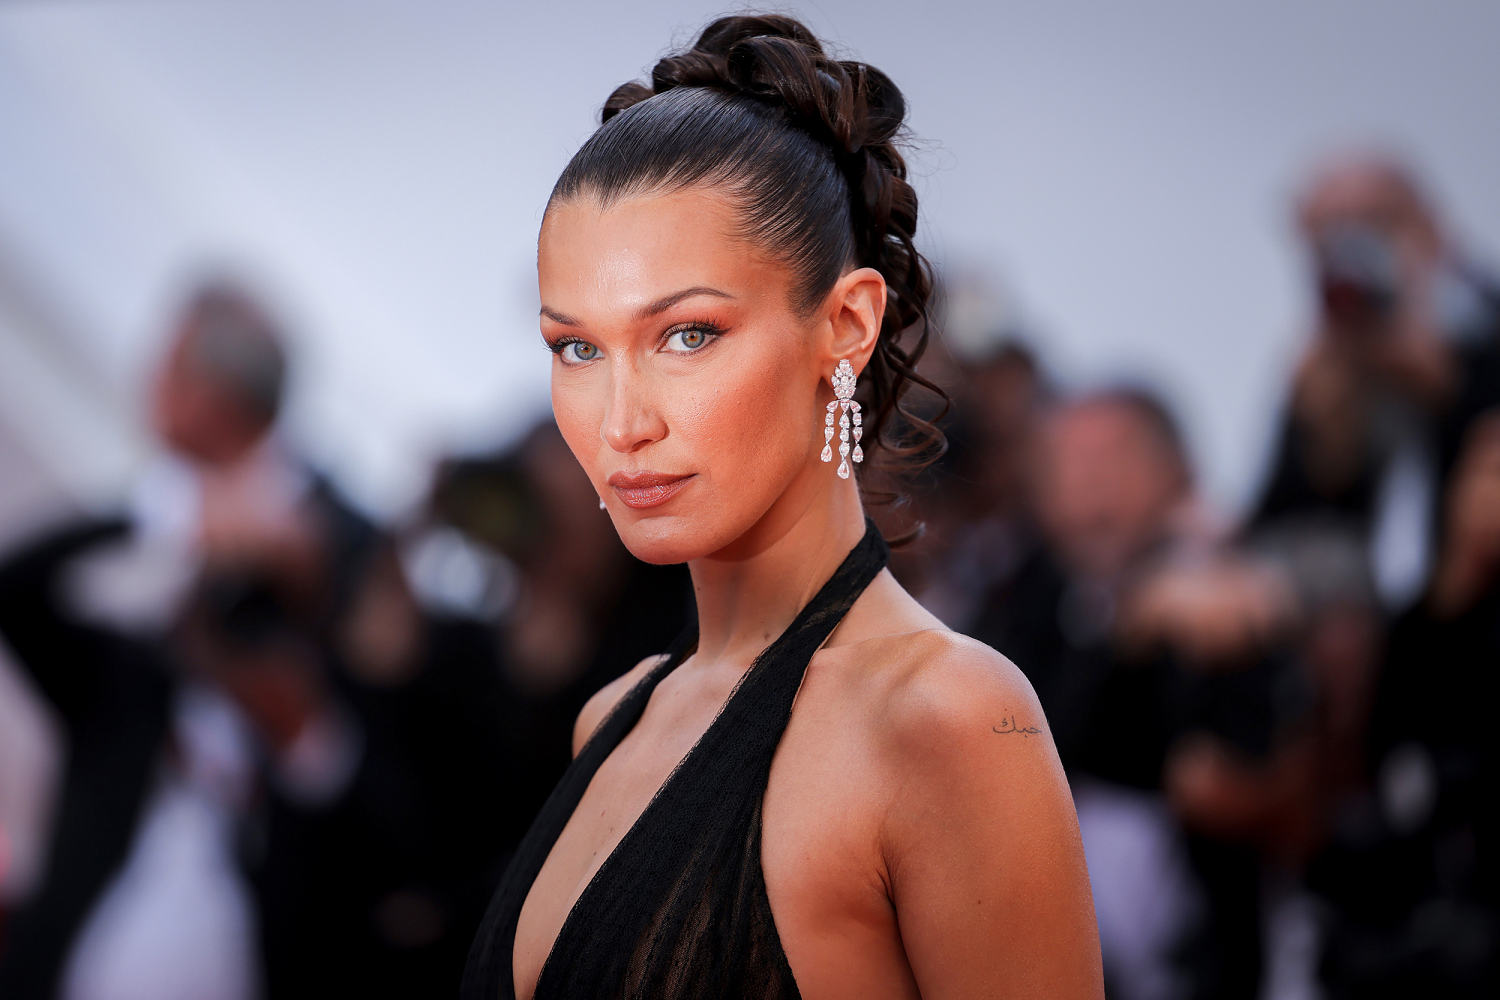 Adidas apologizes for Bella Hadid shoe ad following criticism from Israeli government